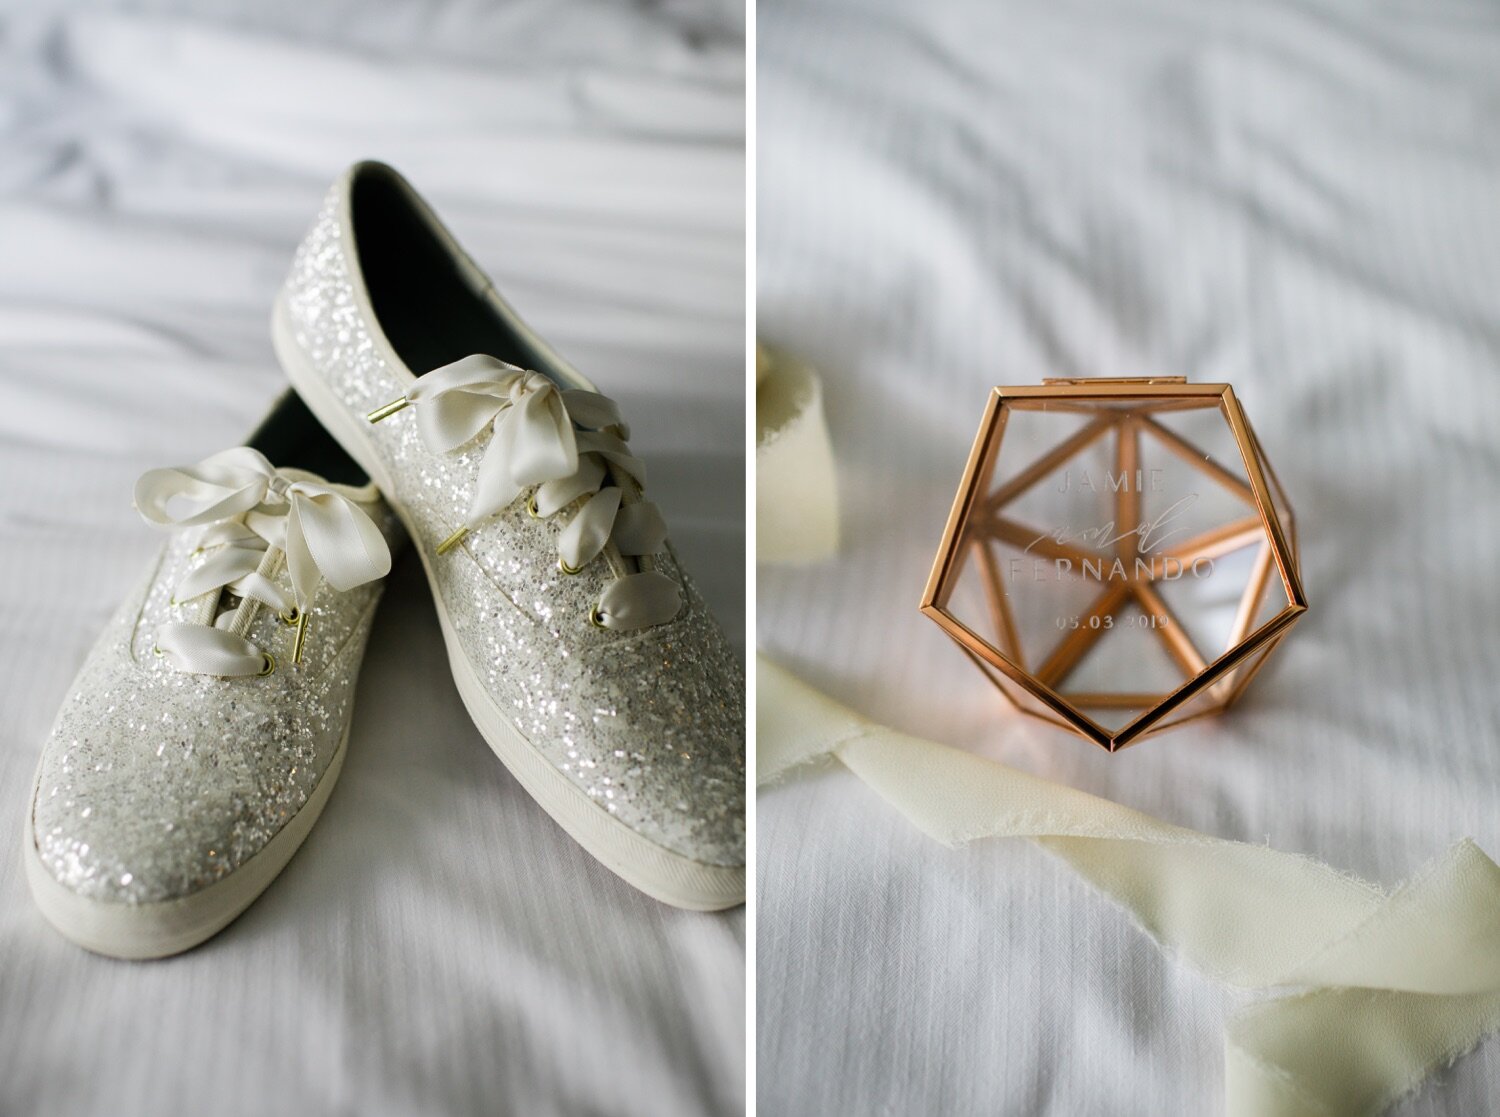 02_Kate Spade bridal sneakers at Whitby Castle wedding in Rye NY_Details at Whitby Castle wedding in Rye NY.jpg